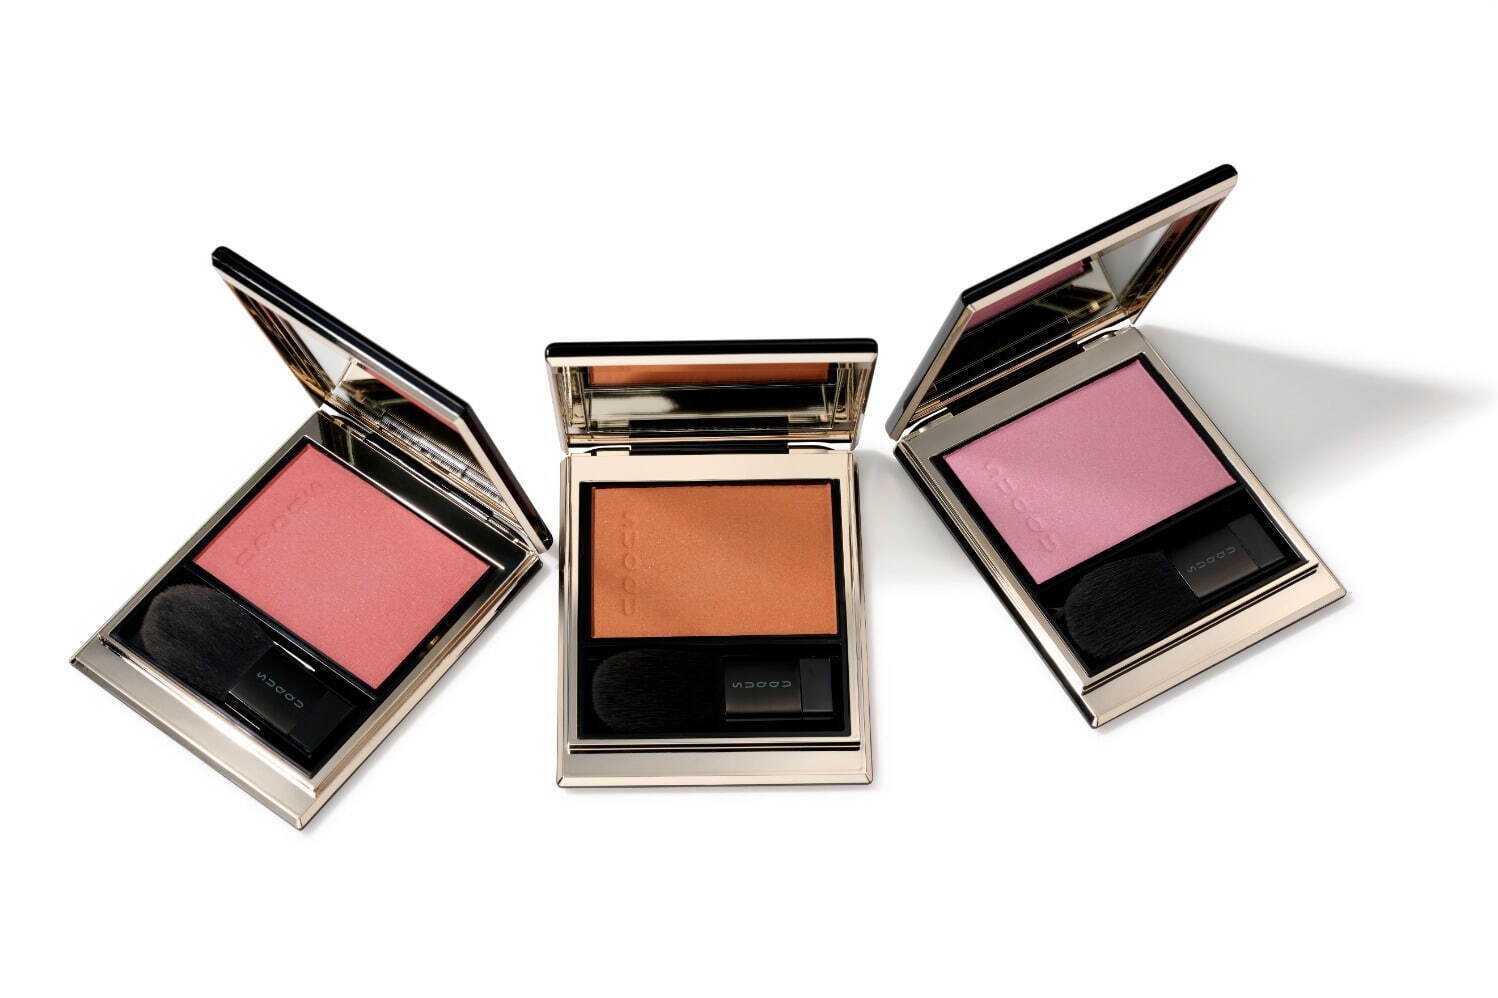 SUQQU 2023 Spring Collection Blush from Left to Right: 103, 104, 105